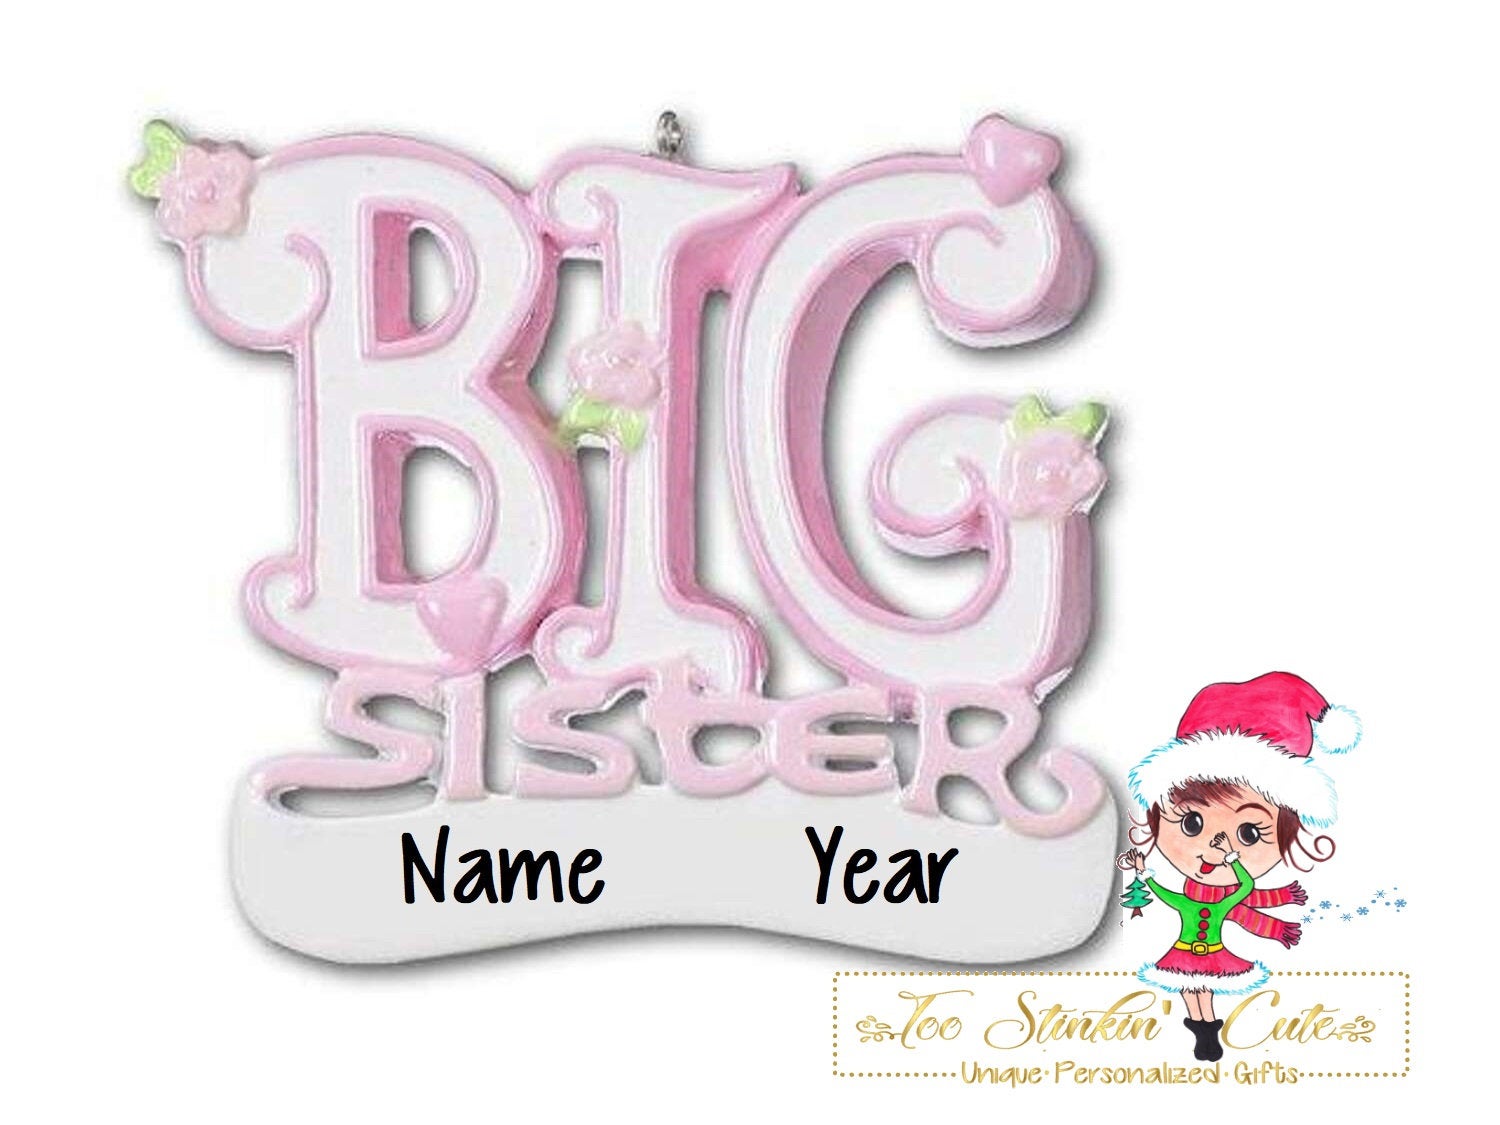 Christmas Ornament Big Sister/ Sibling/ New Baby/ Newborn/ Child - Personalized + Free Shipping!